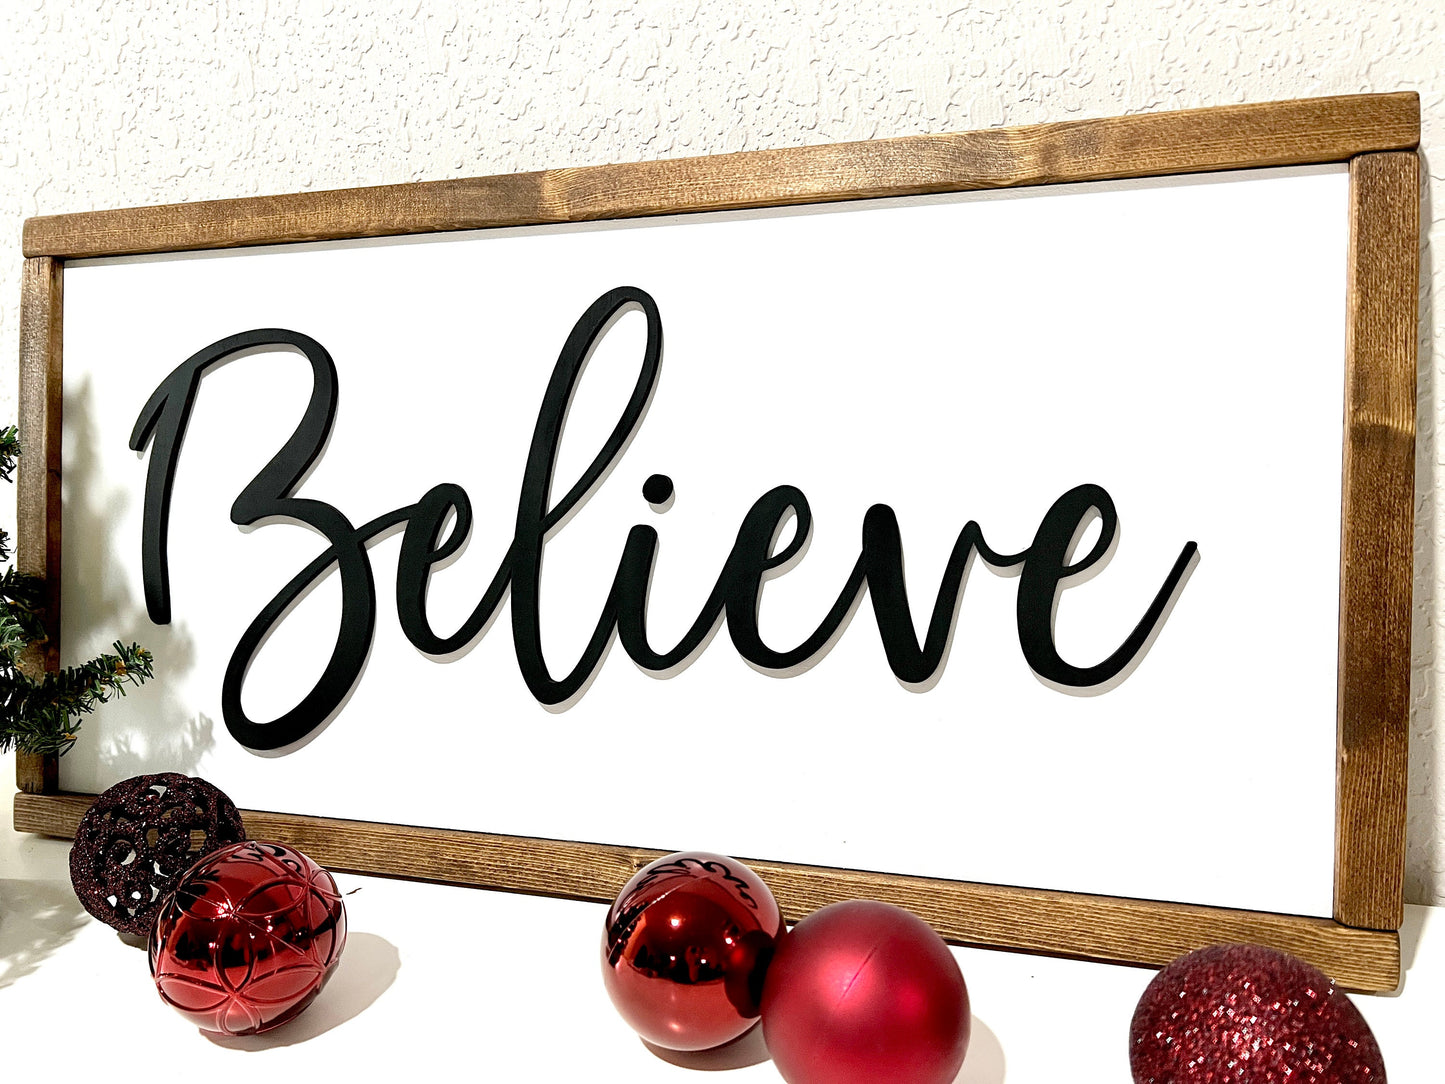 Believe sign, Christmas decorations, 3D holiday decor, framed wood signs, living room wooden sign wall hanging, hearth mantel decor